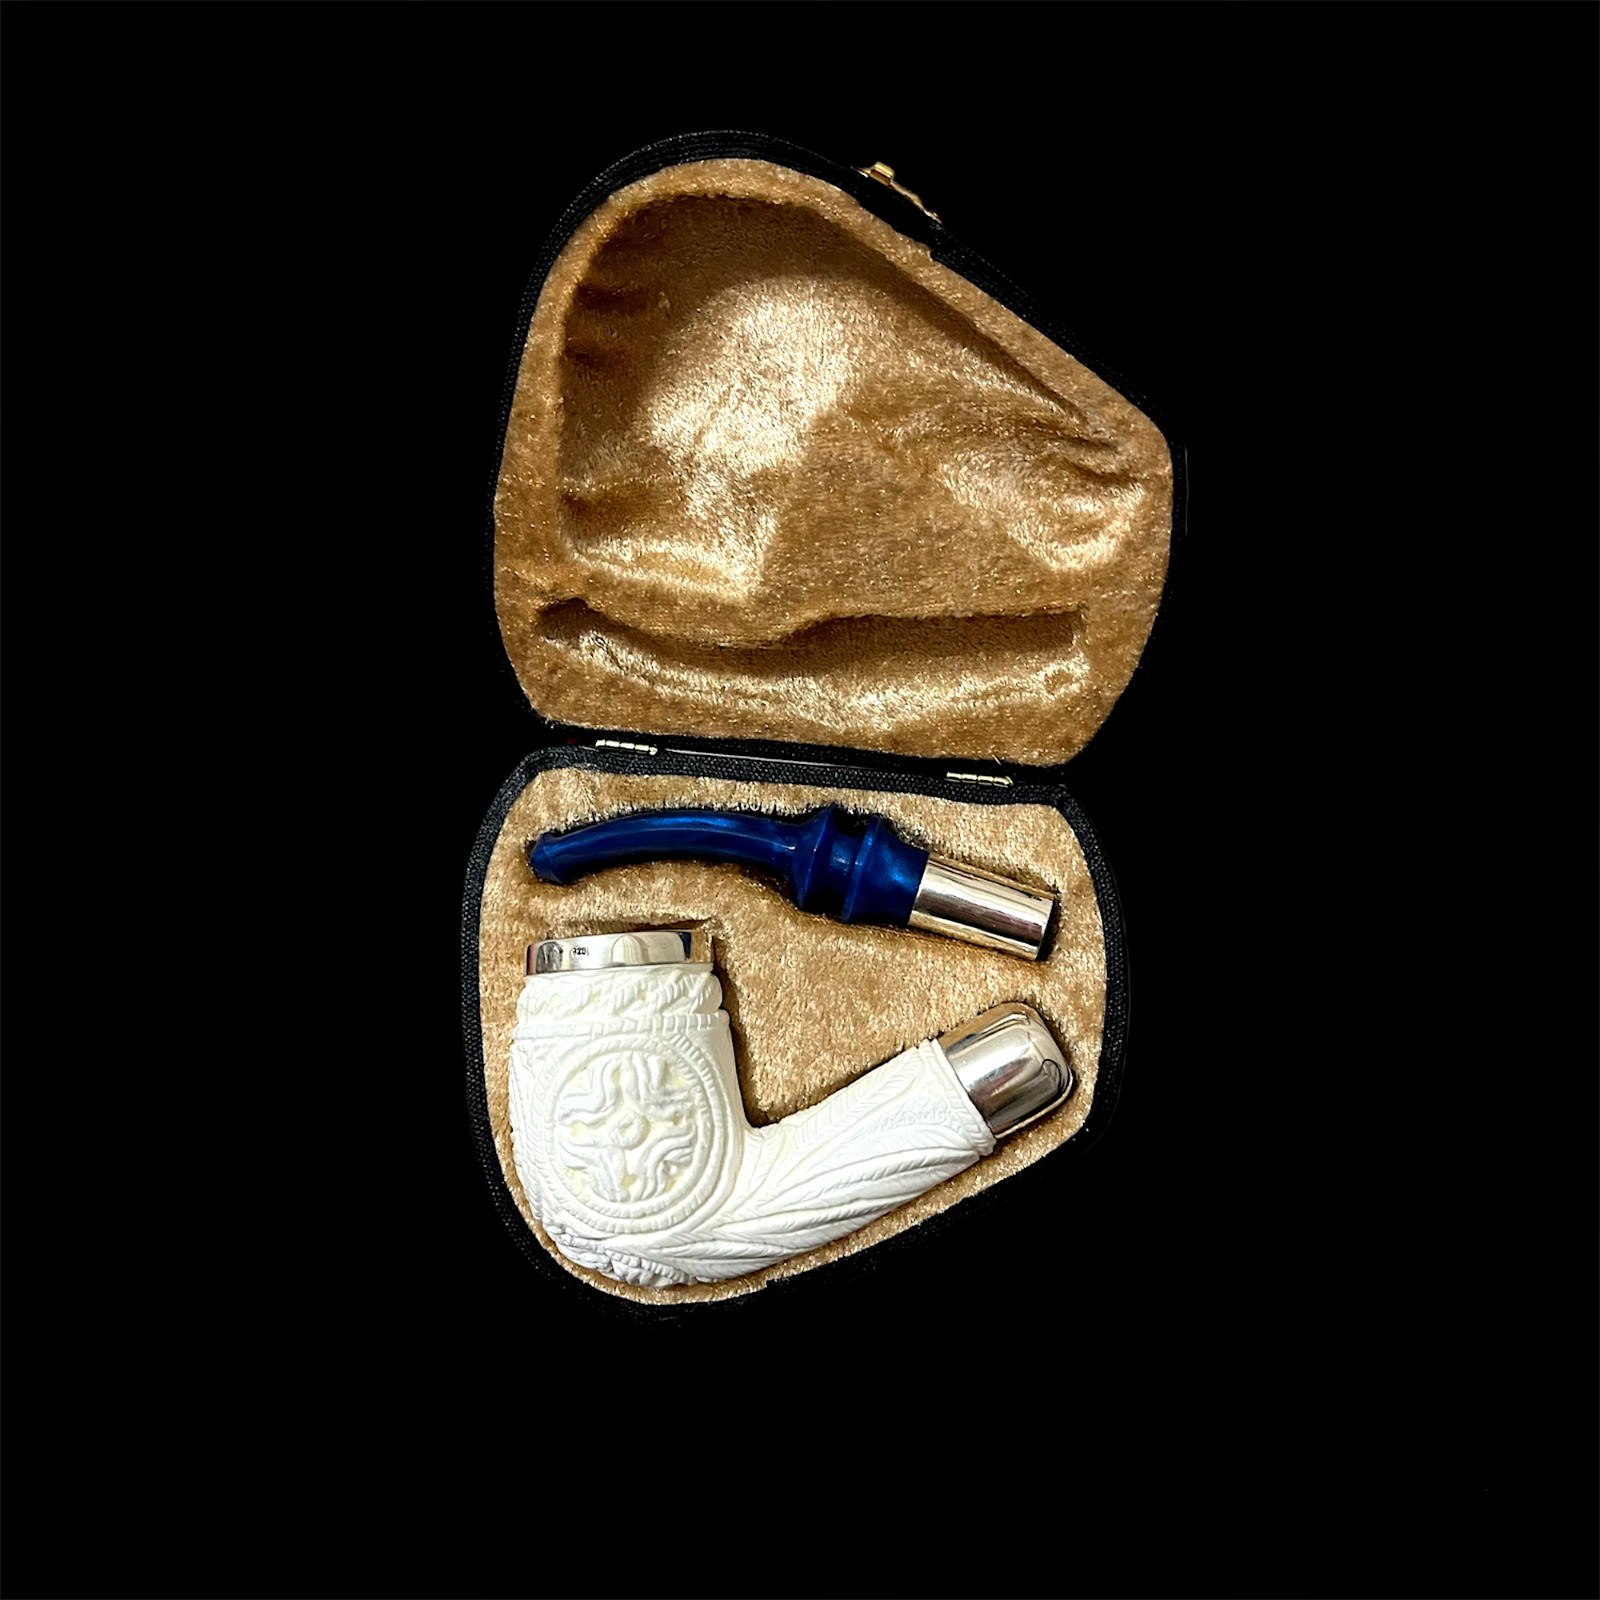 Block Meerschaum Pipe 925 silver unsmoked smoking tobacco pipe w case MD-343